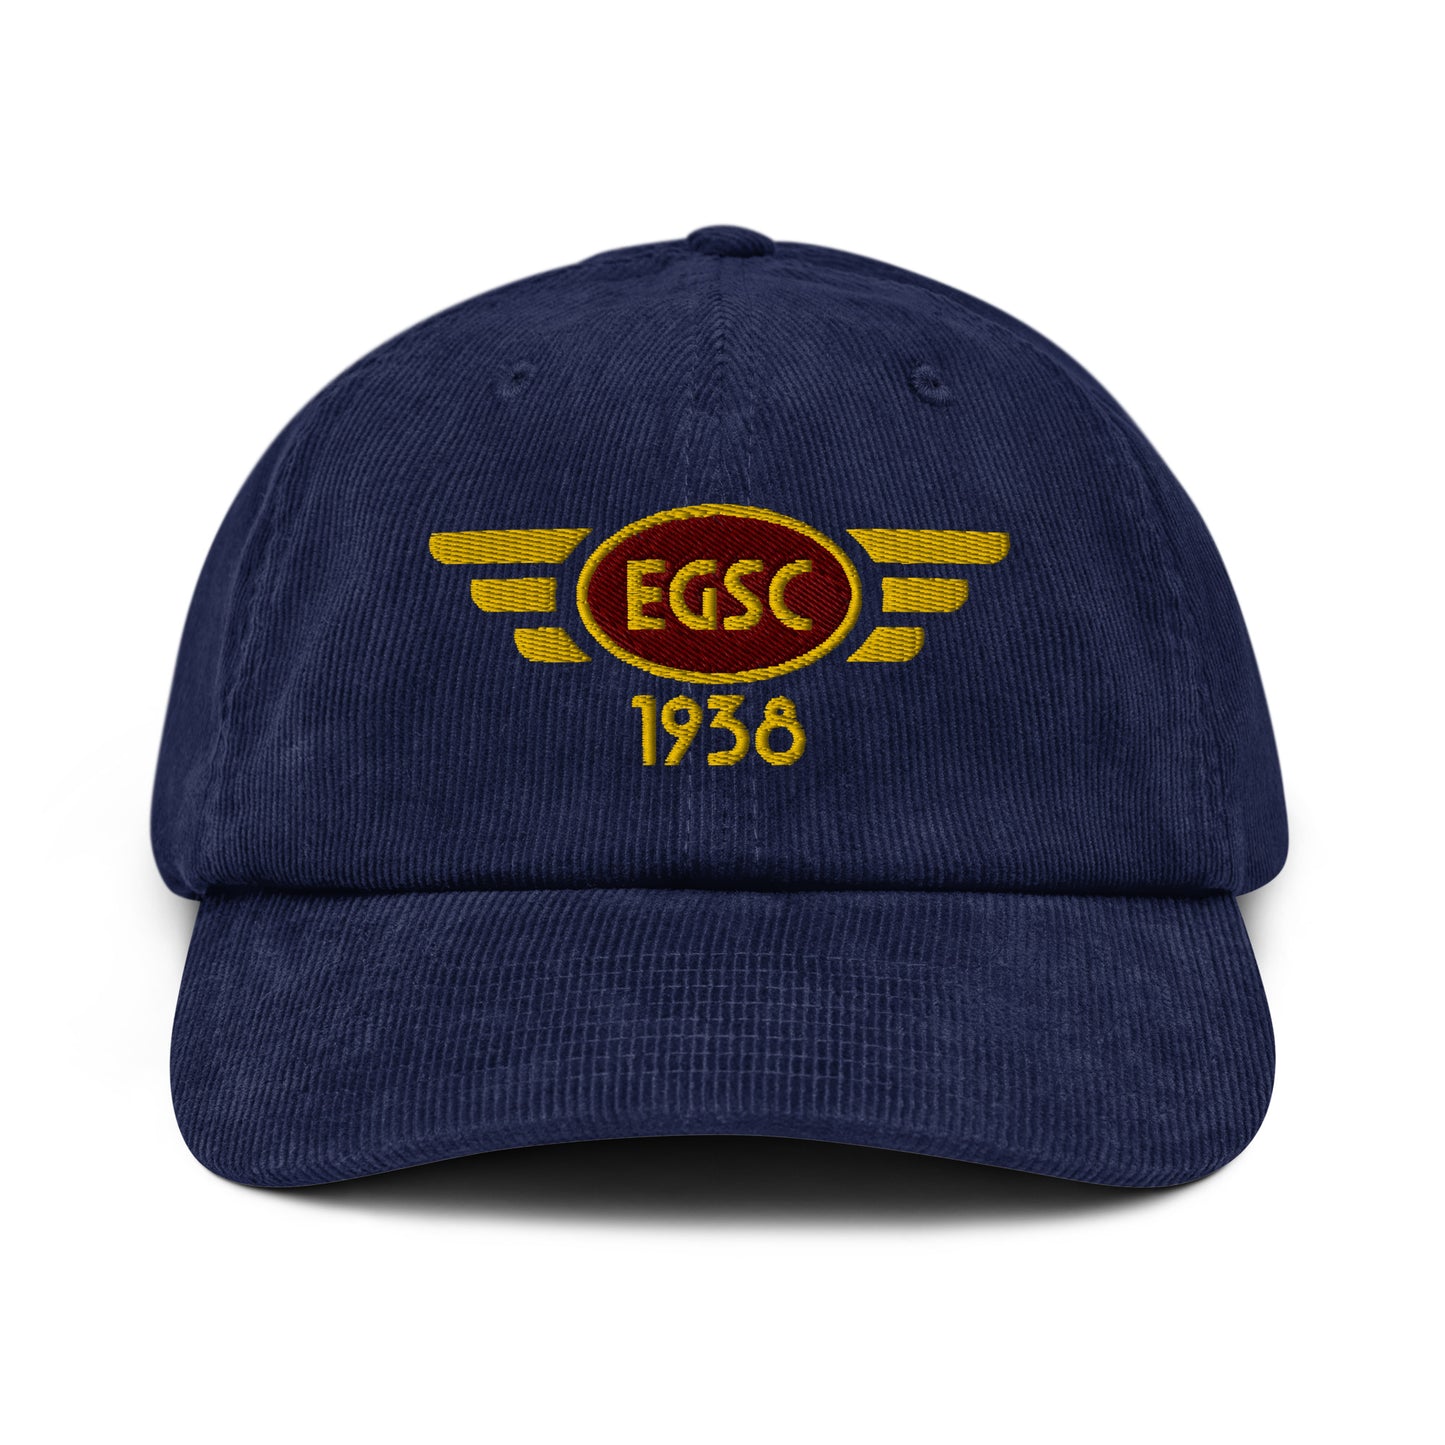 Cambridge Airport corduroy cap with embroidered ICAO code.